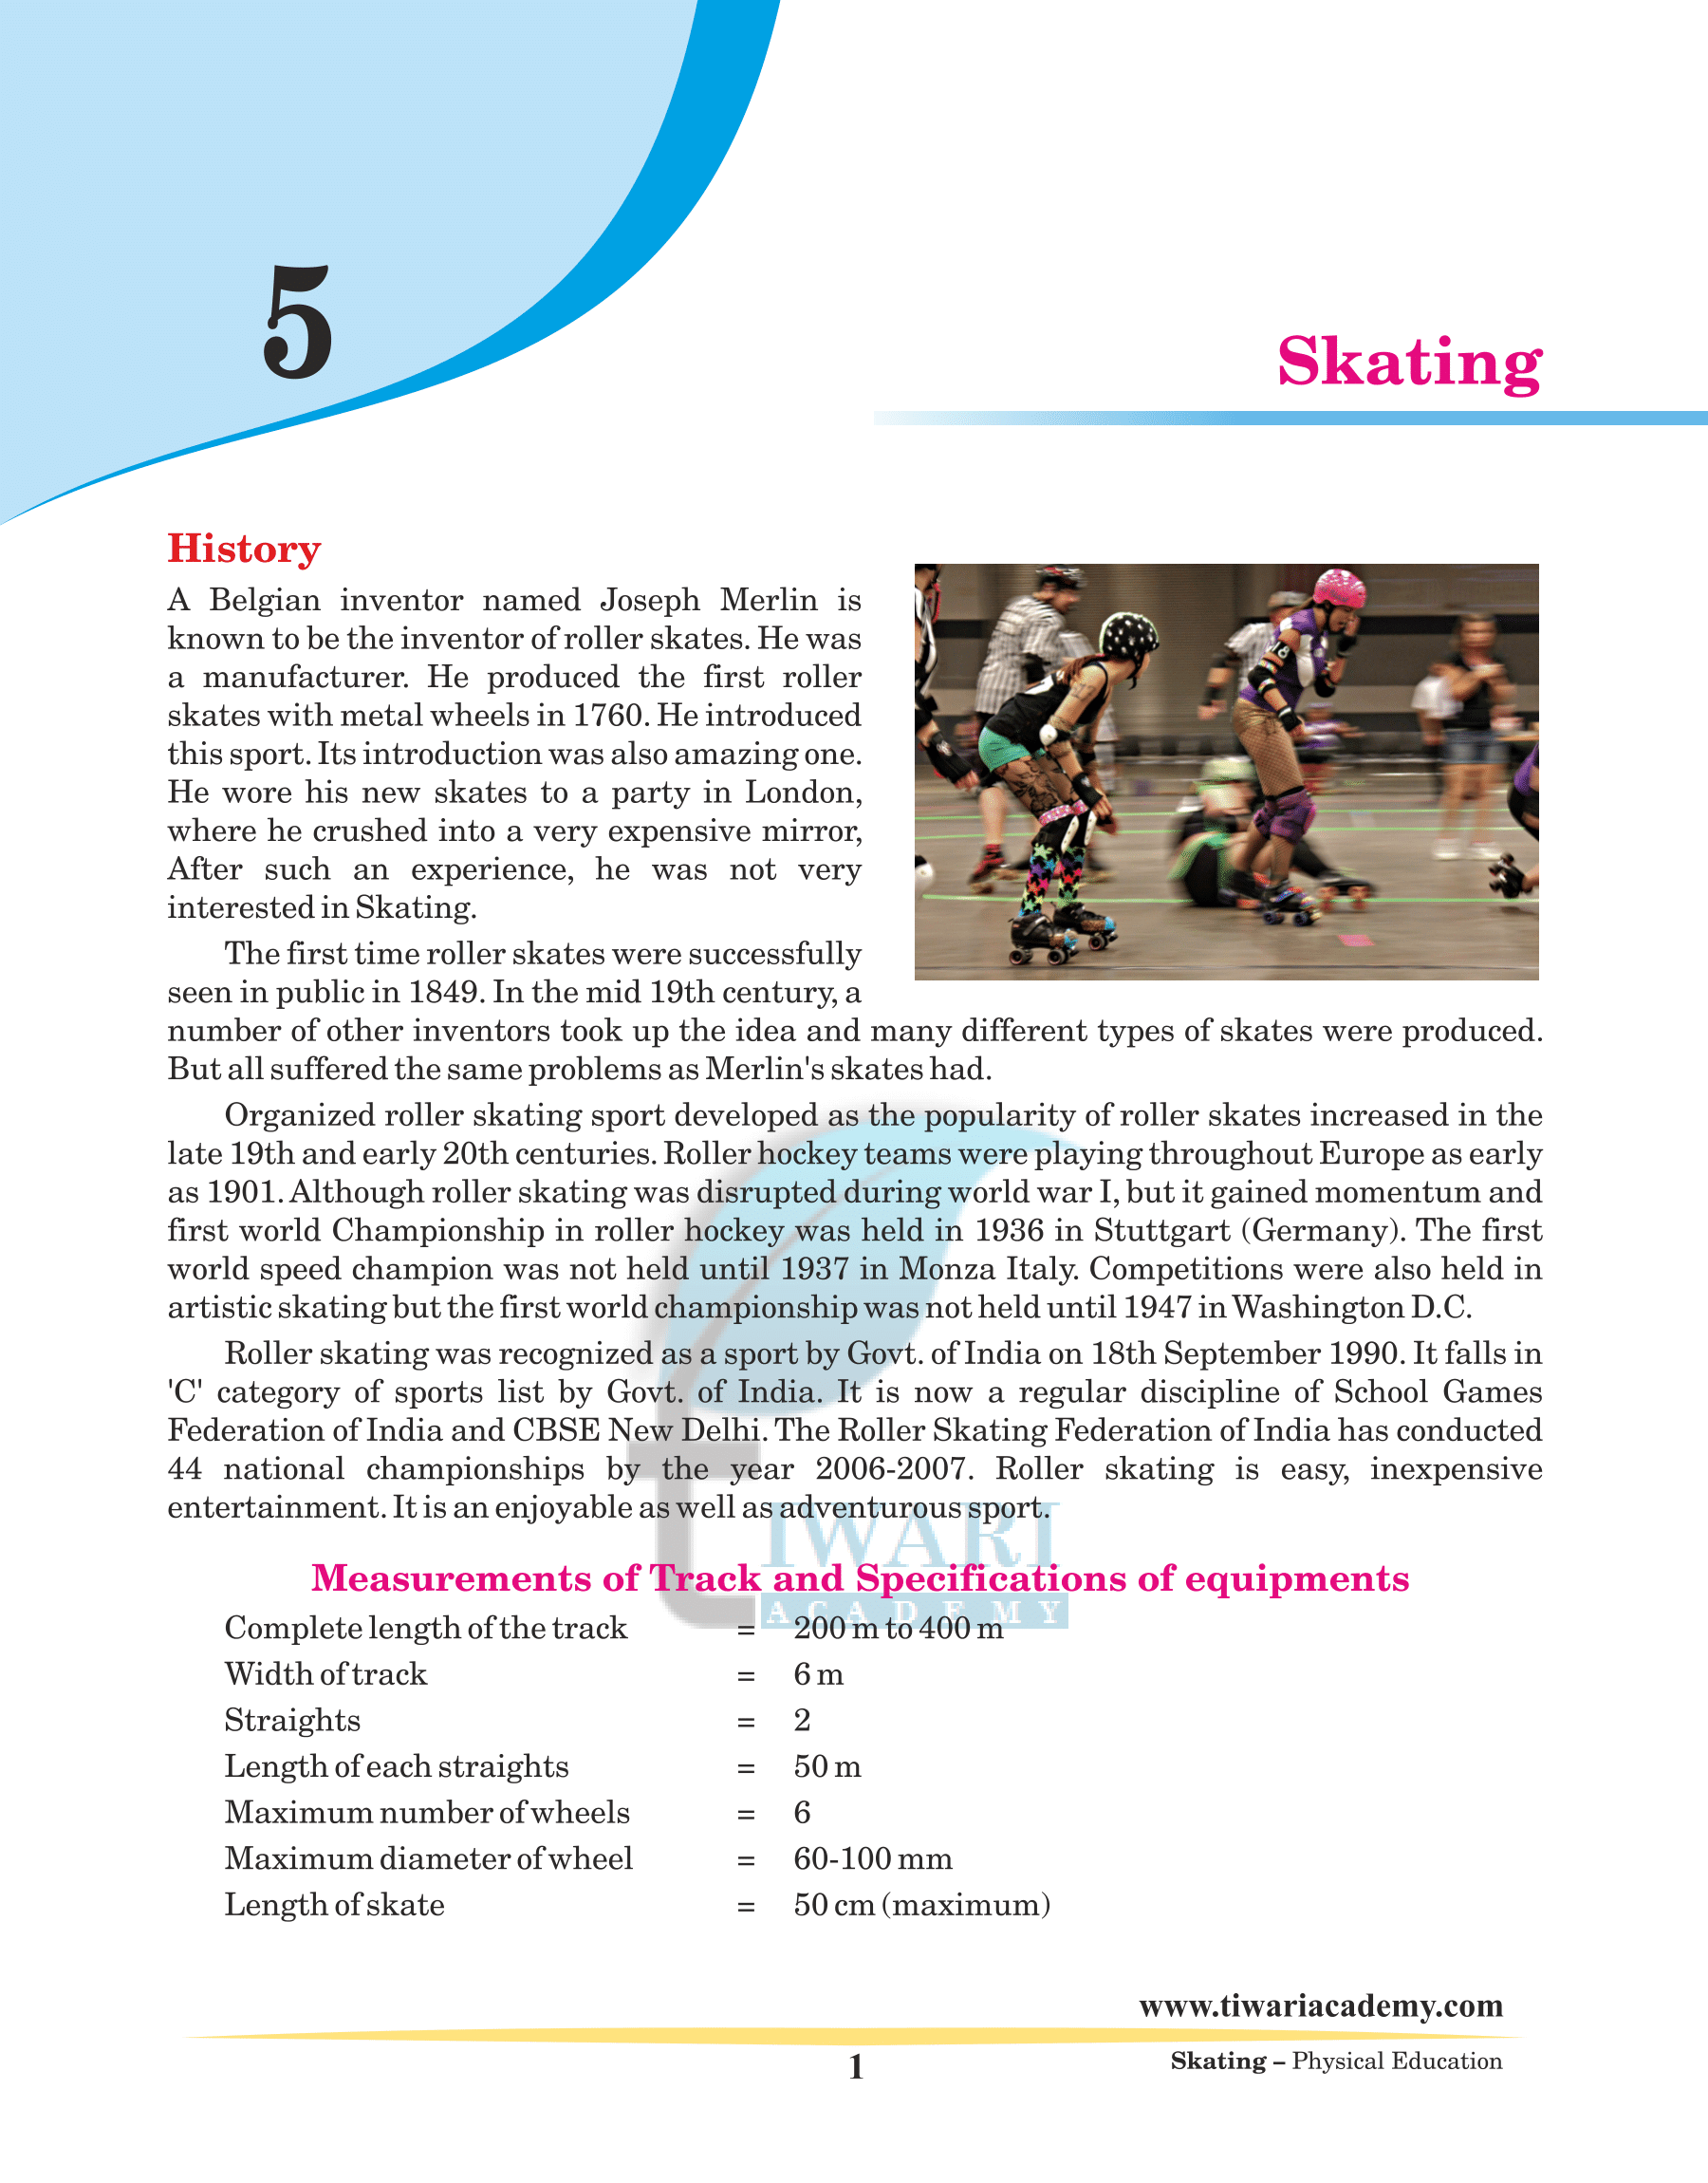 Rules for Skating